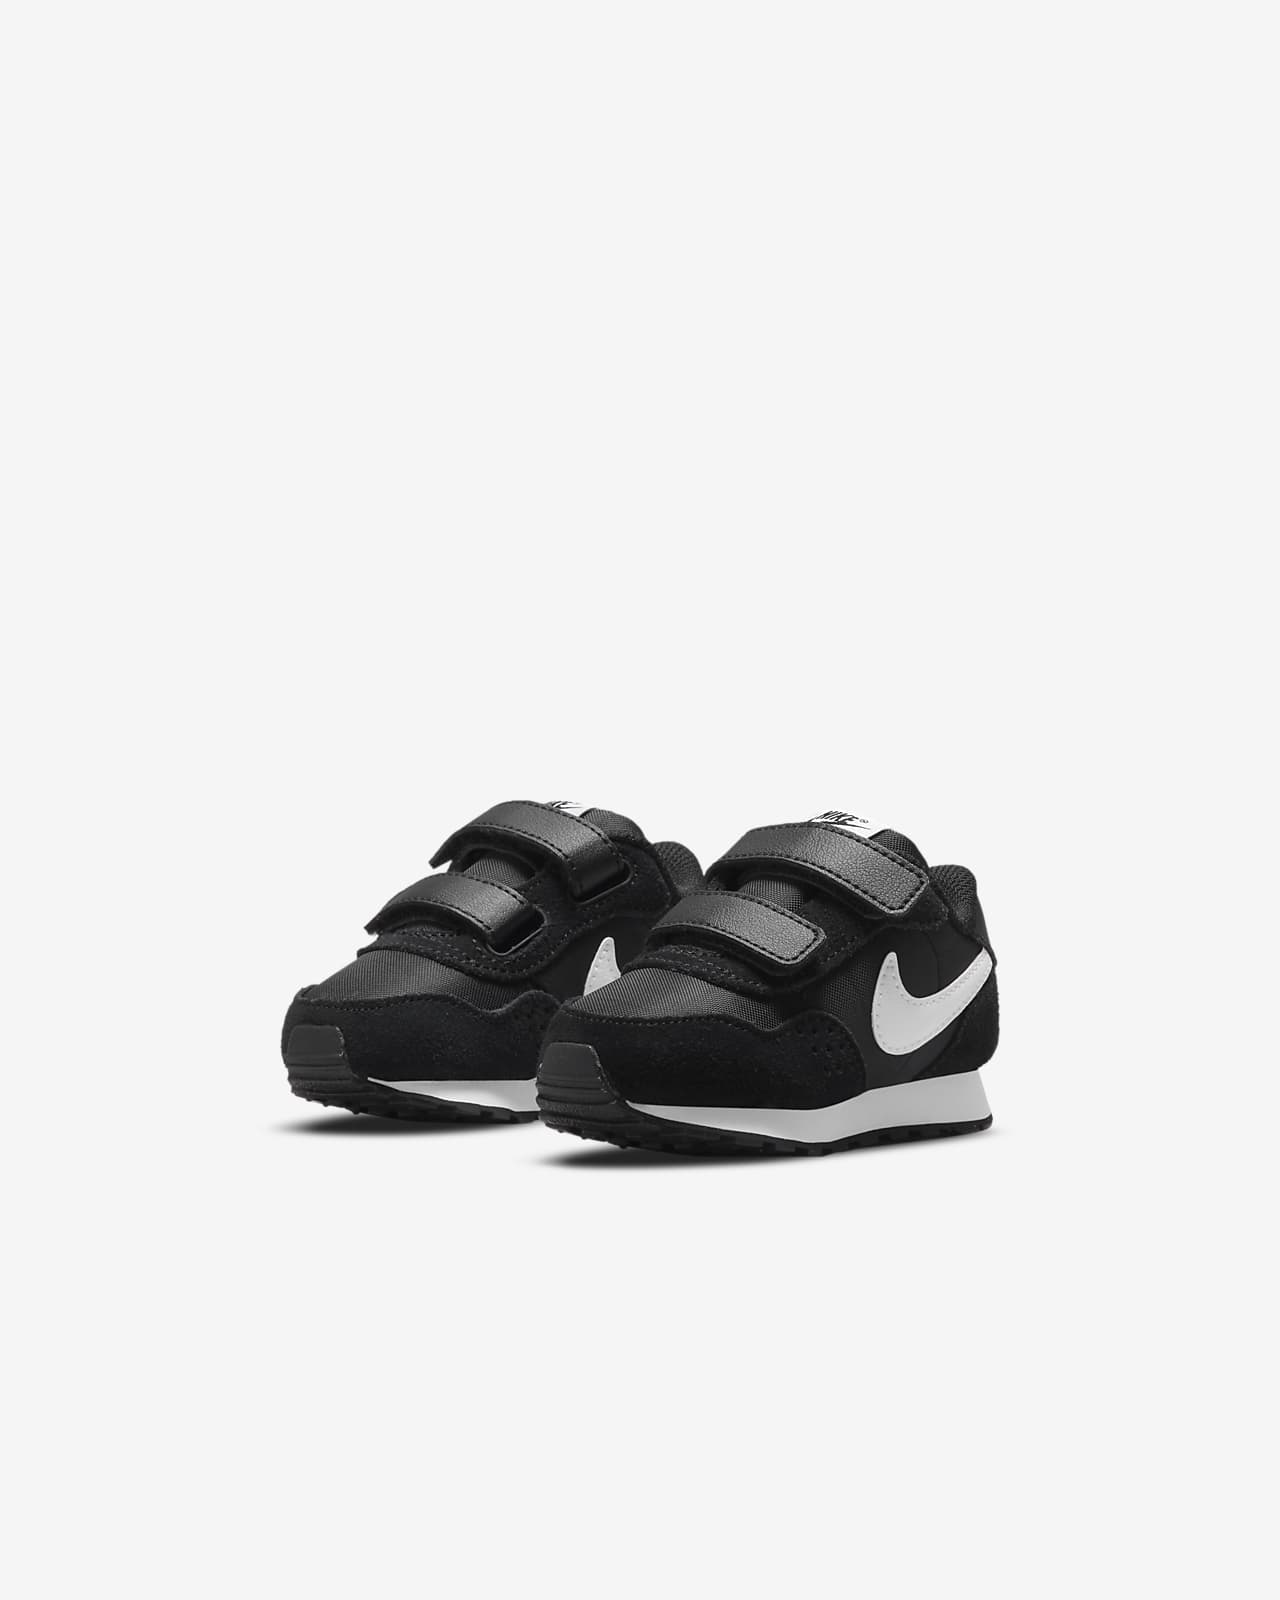 Tot stand brengen Wind browser Nike MD Valiant Baby/Toddler Shoes. Nike.com